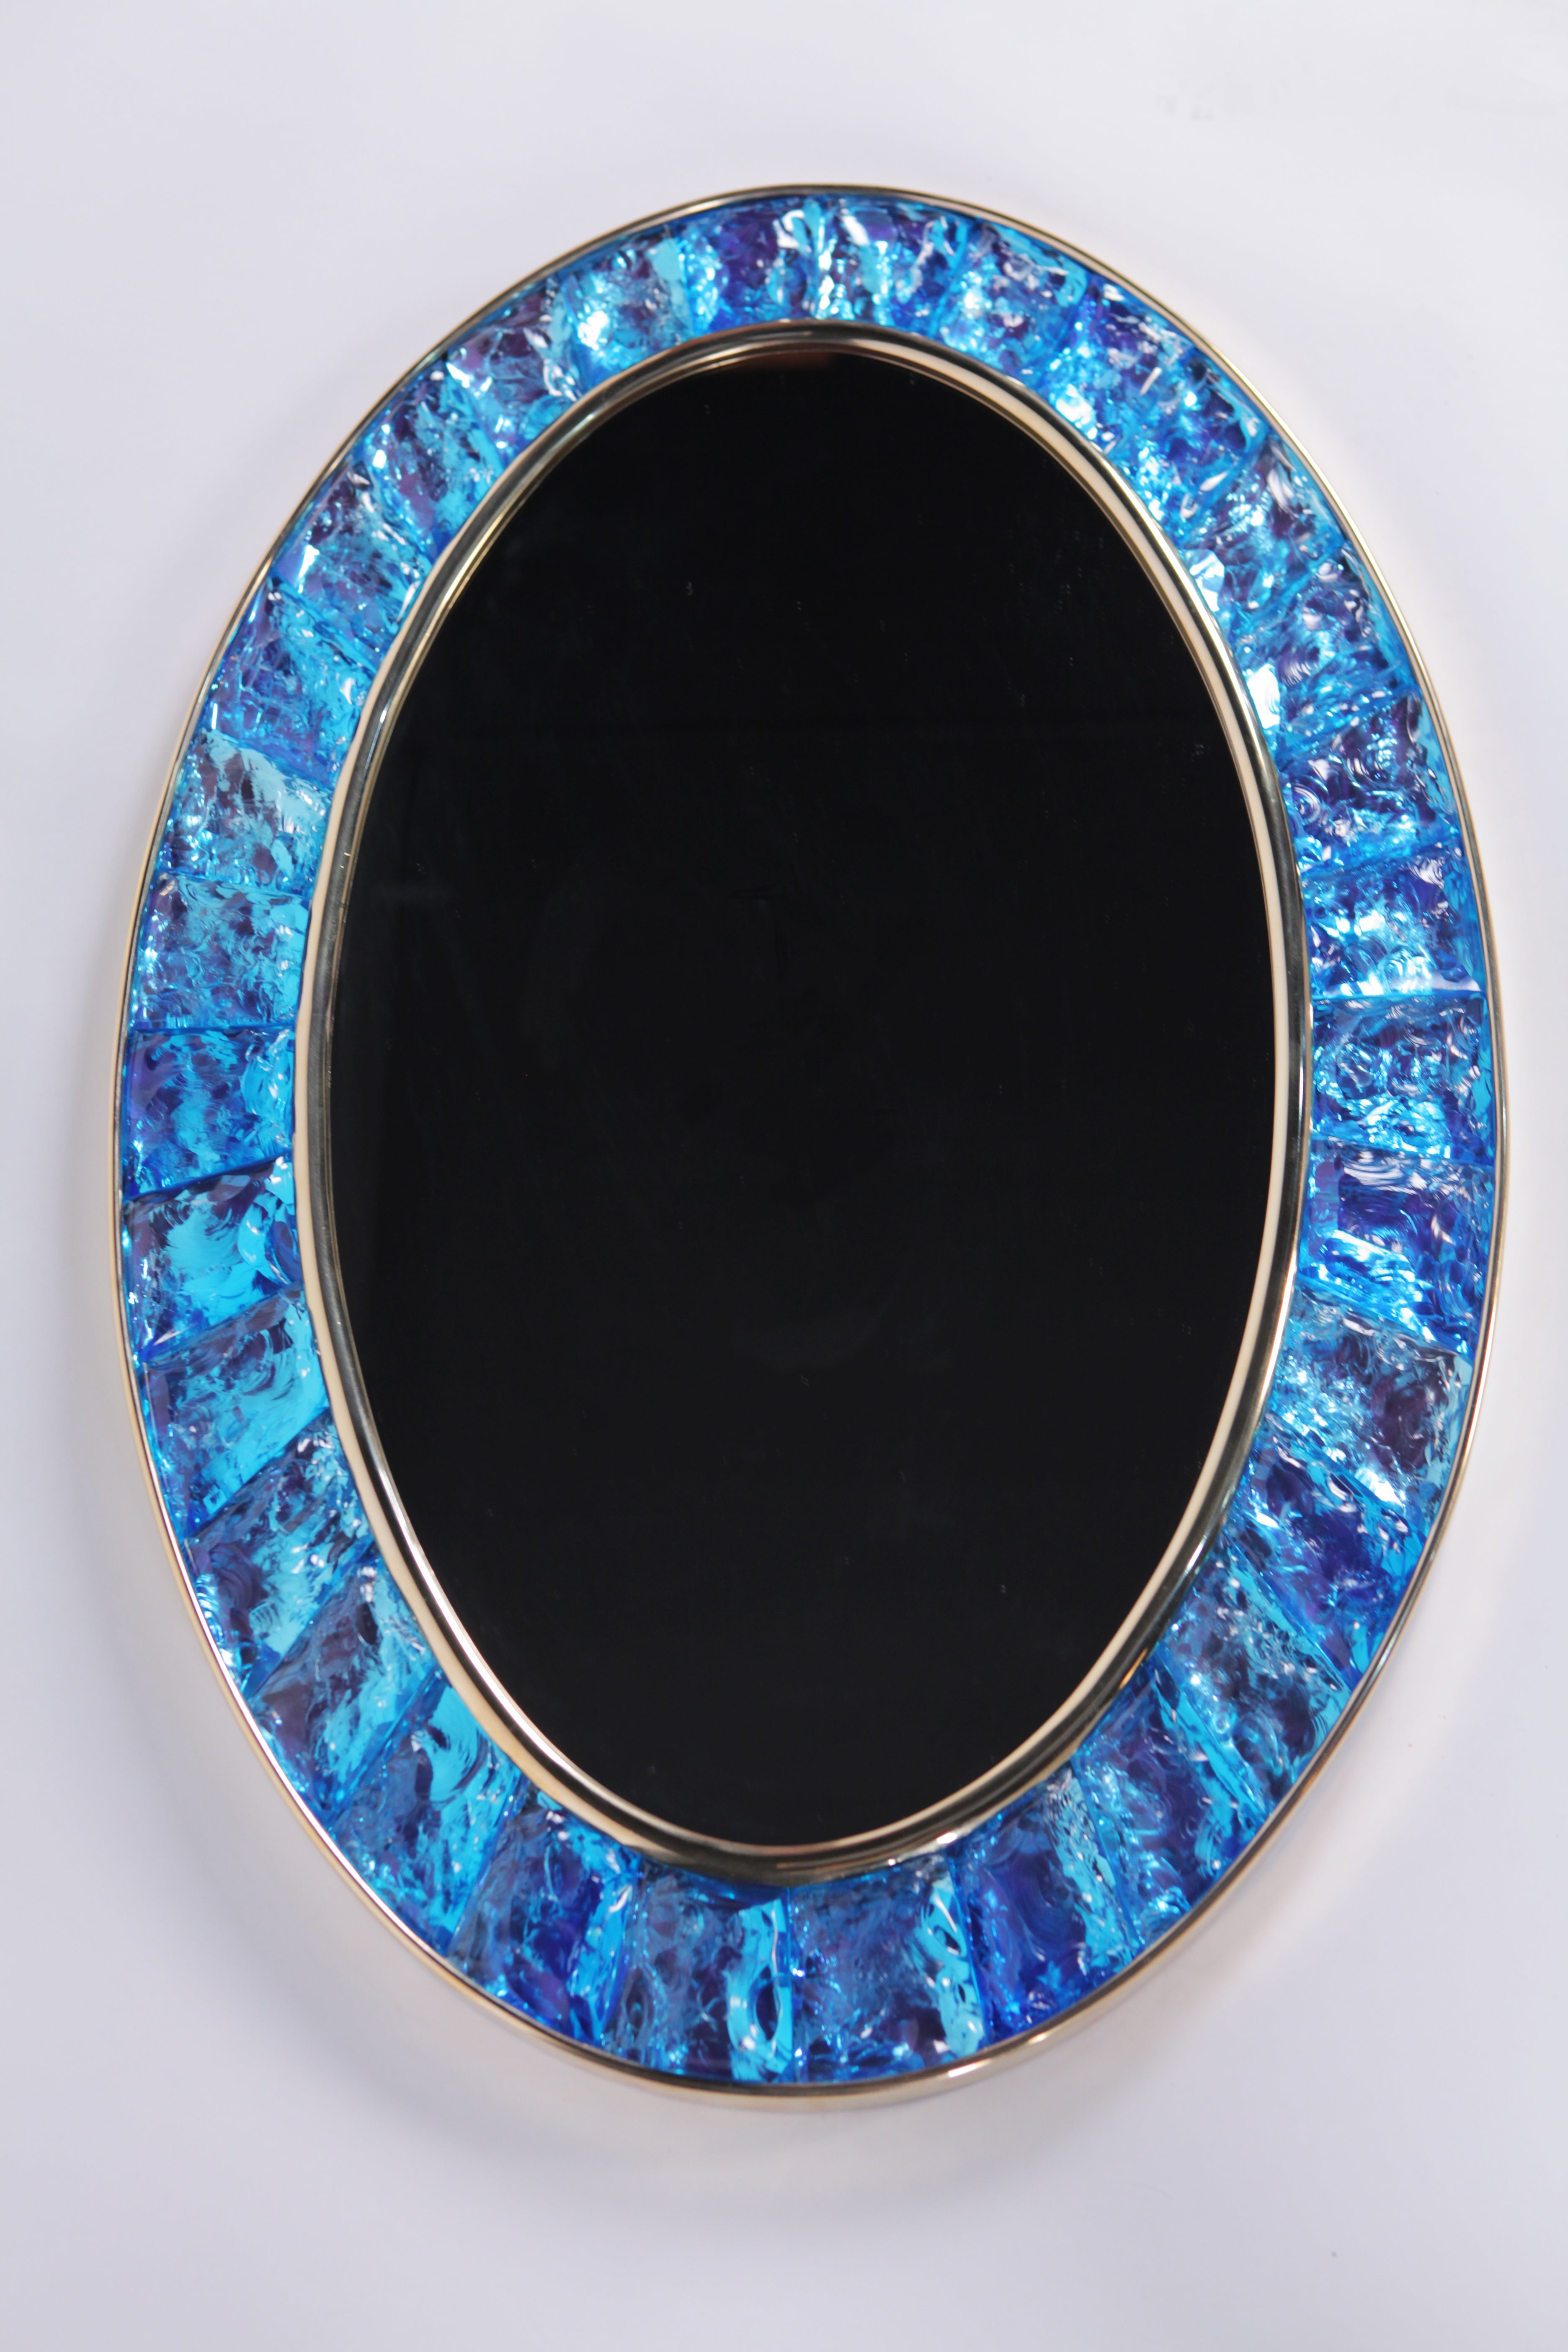 Amazing hammered unique mirror by Ghirò